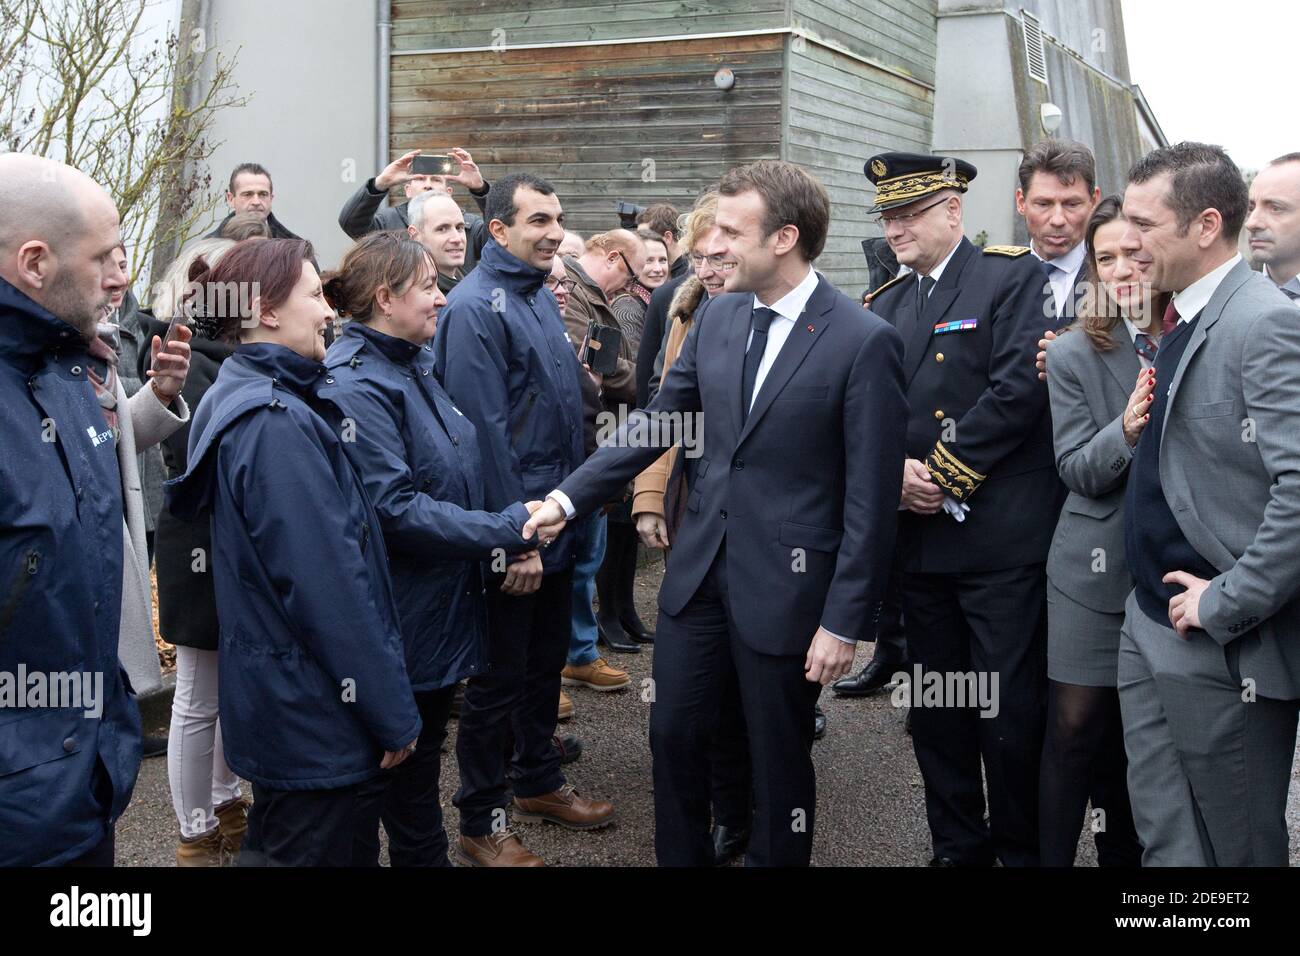 French president Emmanuel Macron meets with teachers and students as they visit an EPIDE (Etablissement pour l'insertion dans l'emploi) school on Febuary 7, 2019, in Etang-sur-Arroux, central eastern France, ahead of a national debat session. Photo by JC Tardivon/Pool/ABACAPRESS.COM Stock Photo